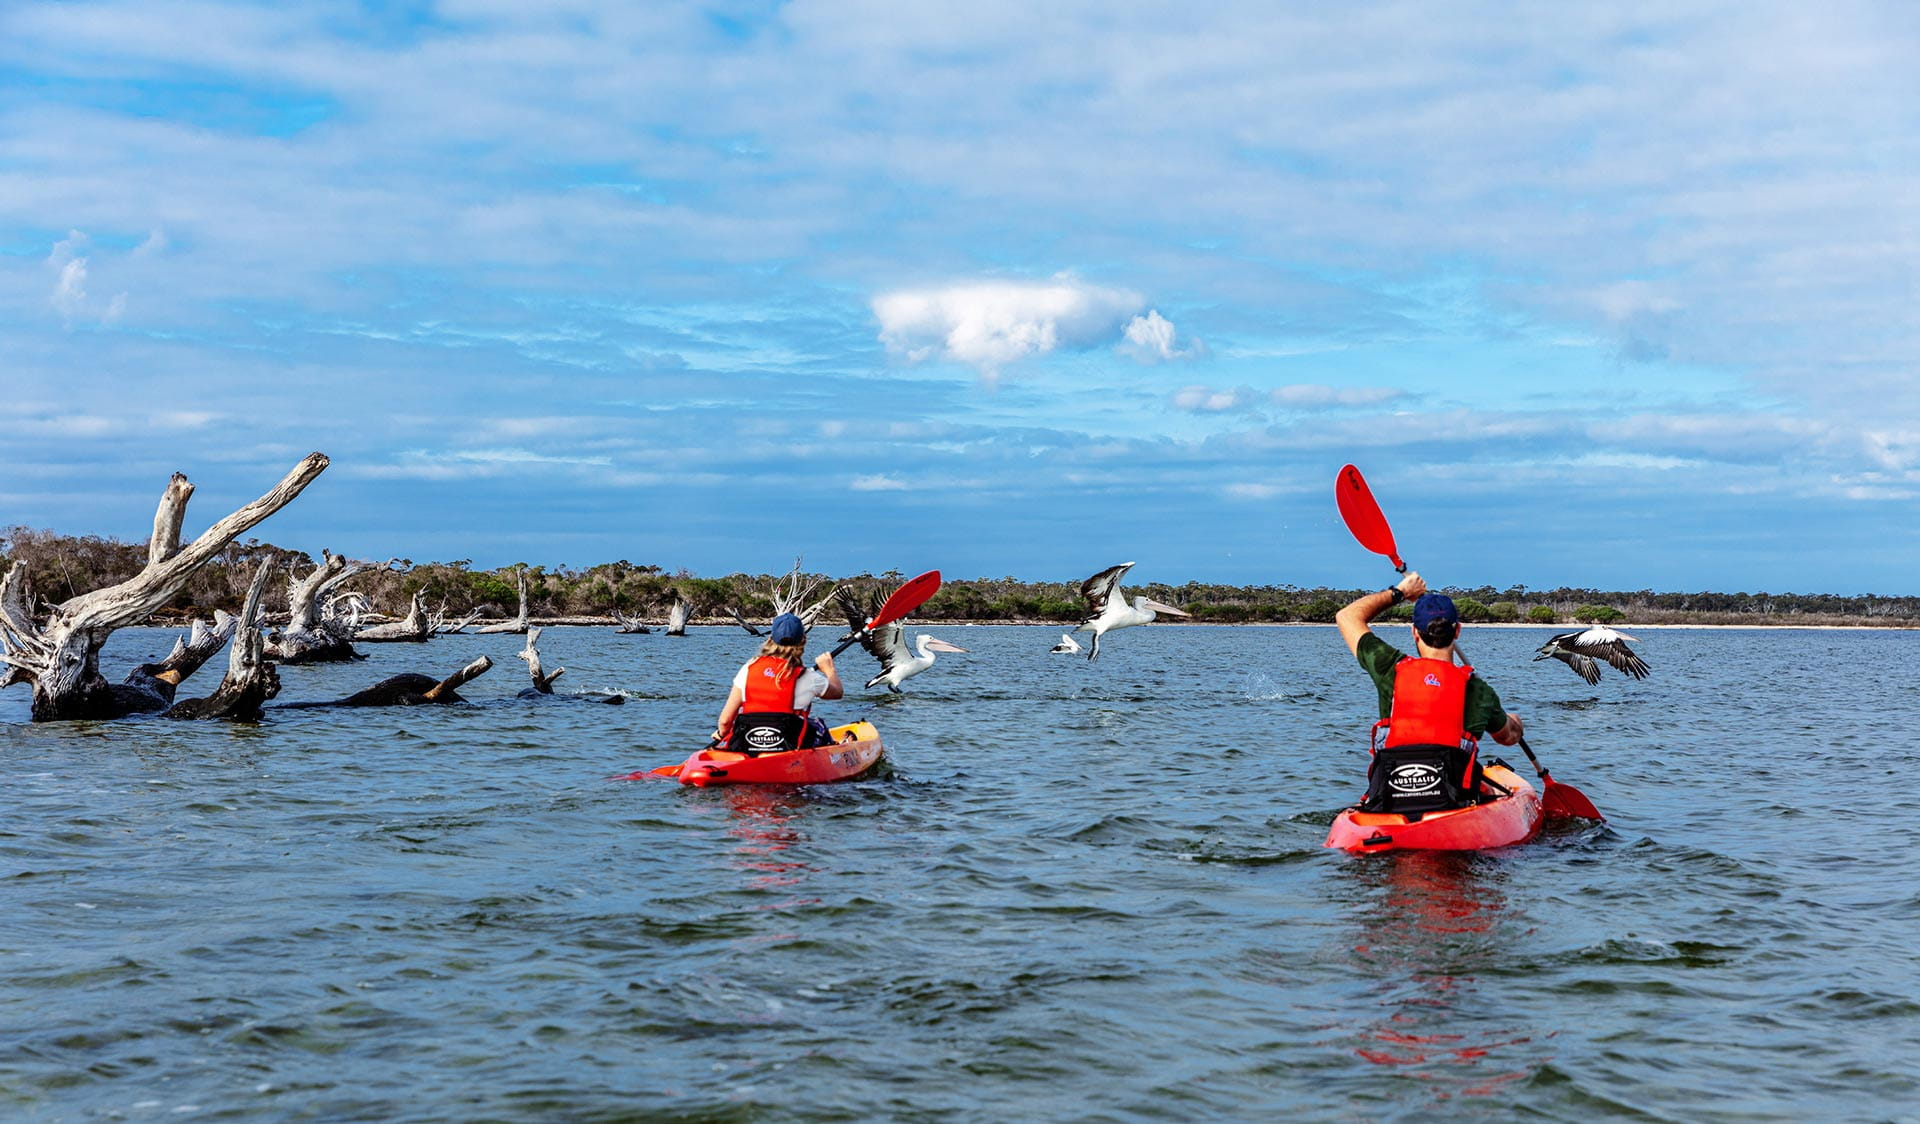 Two kayakers come across a group of pelicans on the Gippsland Lakes.